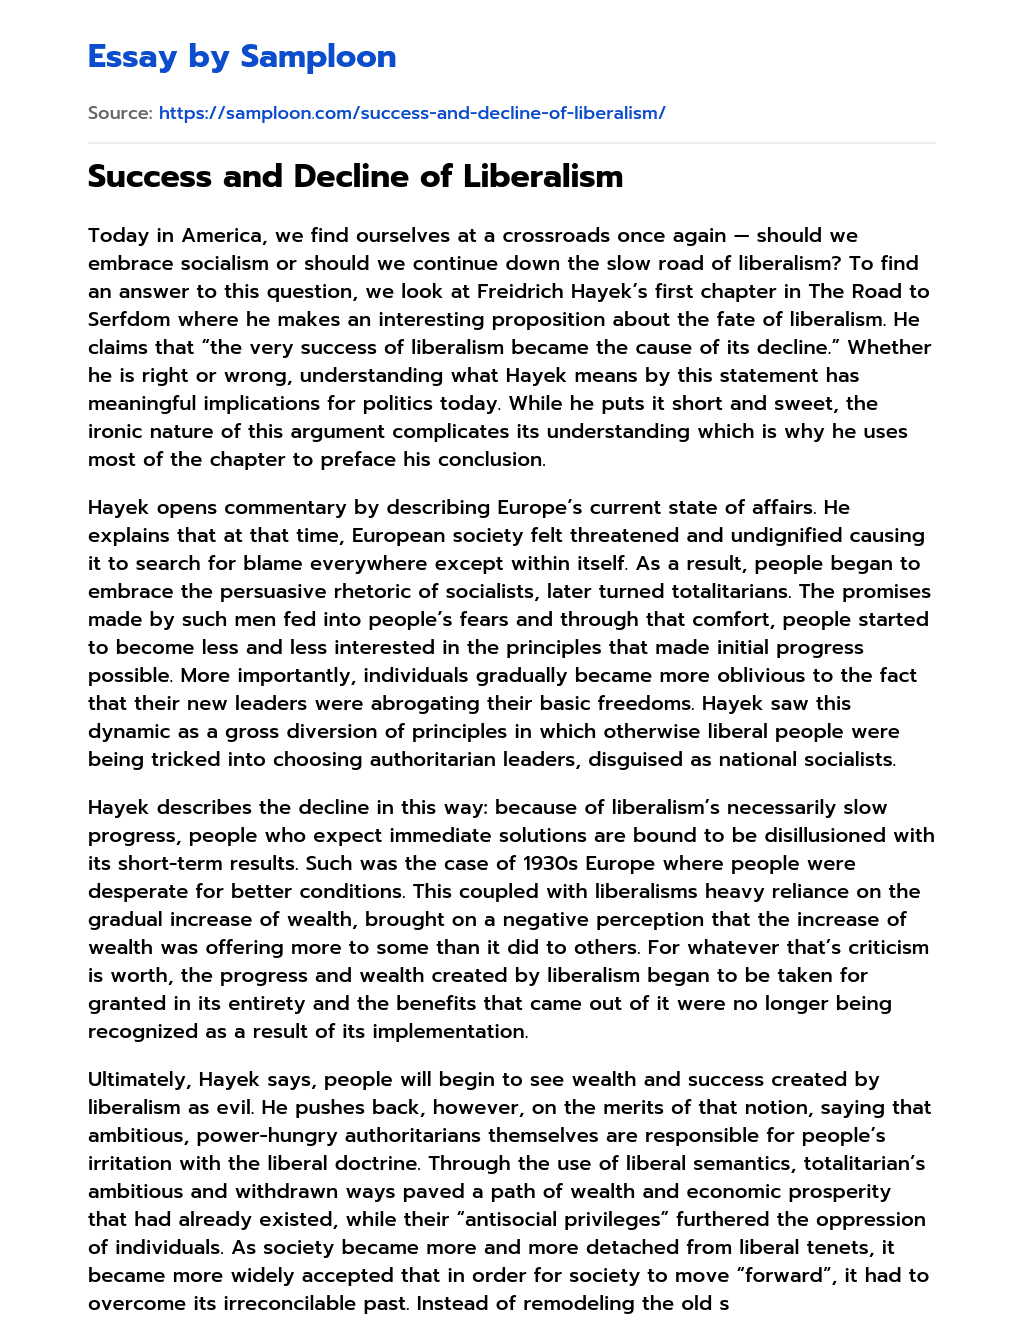 Success and Decline of Liberalism essay